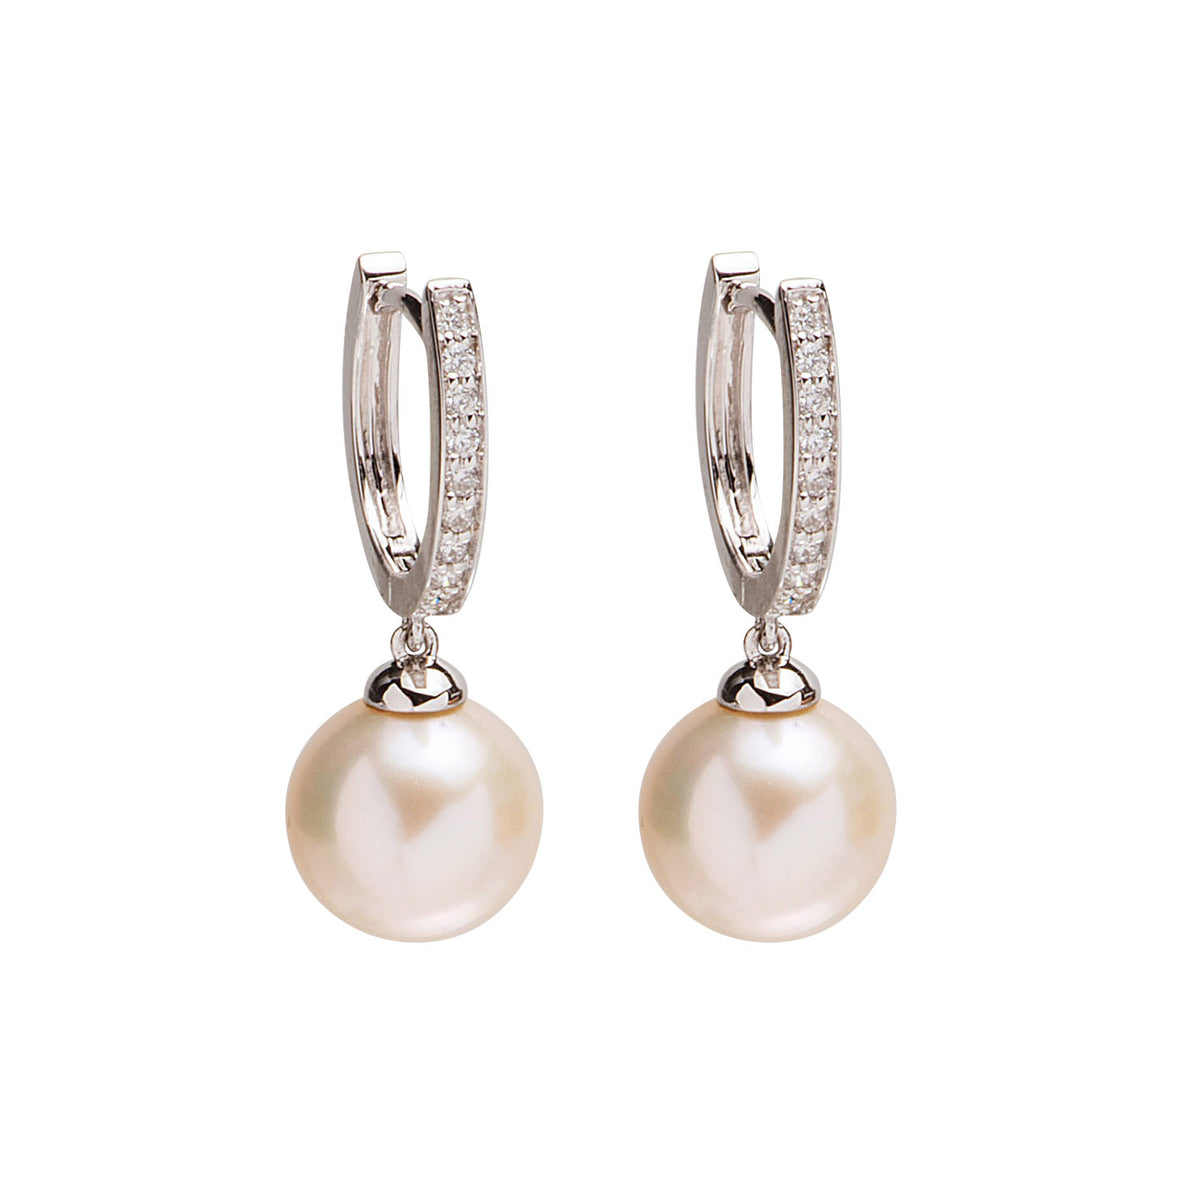 Pearl Earring. Earrings. 18K gold earring. Fresh water pearl. White Gold, yellow gold, rose gold. Perfect Gift. Earring gift. Hanging Pearl. Chain Erring. Fine jewelry. Anatol. Σκουλαρίκι χρυσό. Σκουλαρίκι  με μαργαριτάρι. Σκουλαρίκι αλυσίδα. Σκουλαρίκι με πέρλα.